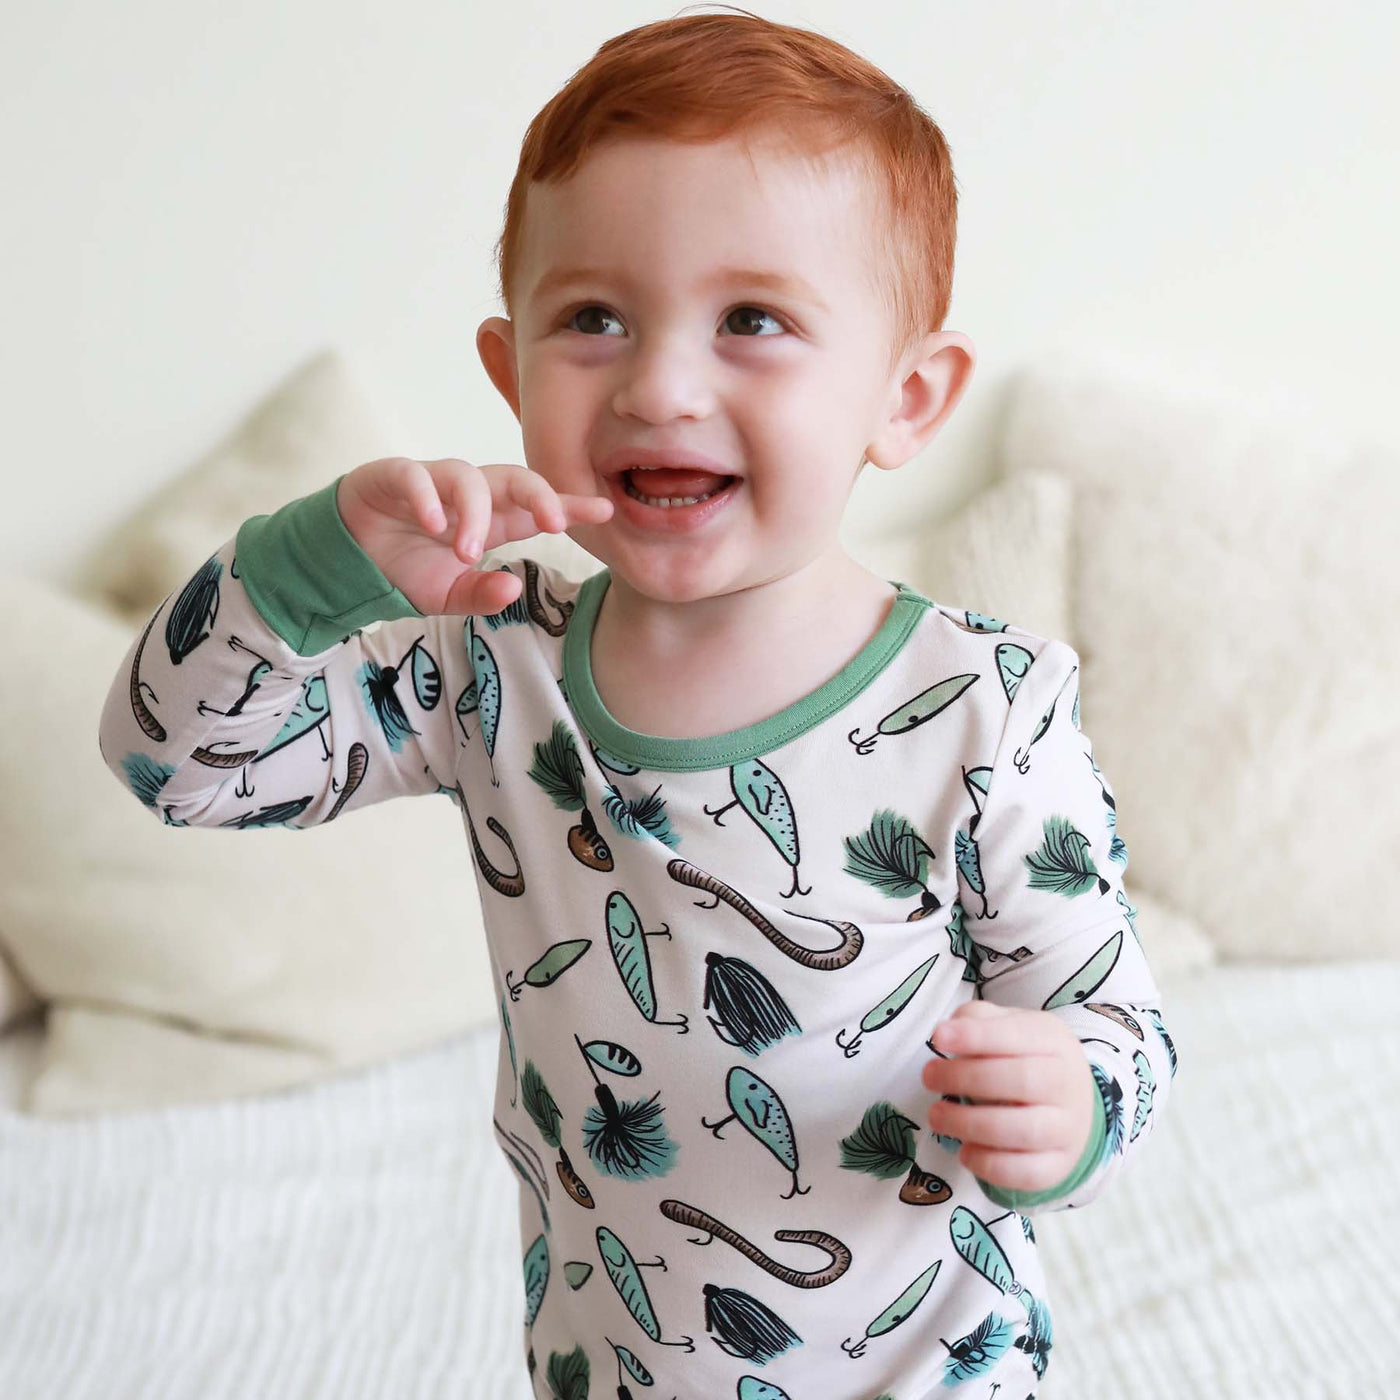 fishing lure themed pajamas for kids made of bamboo 